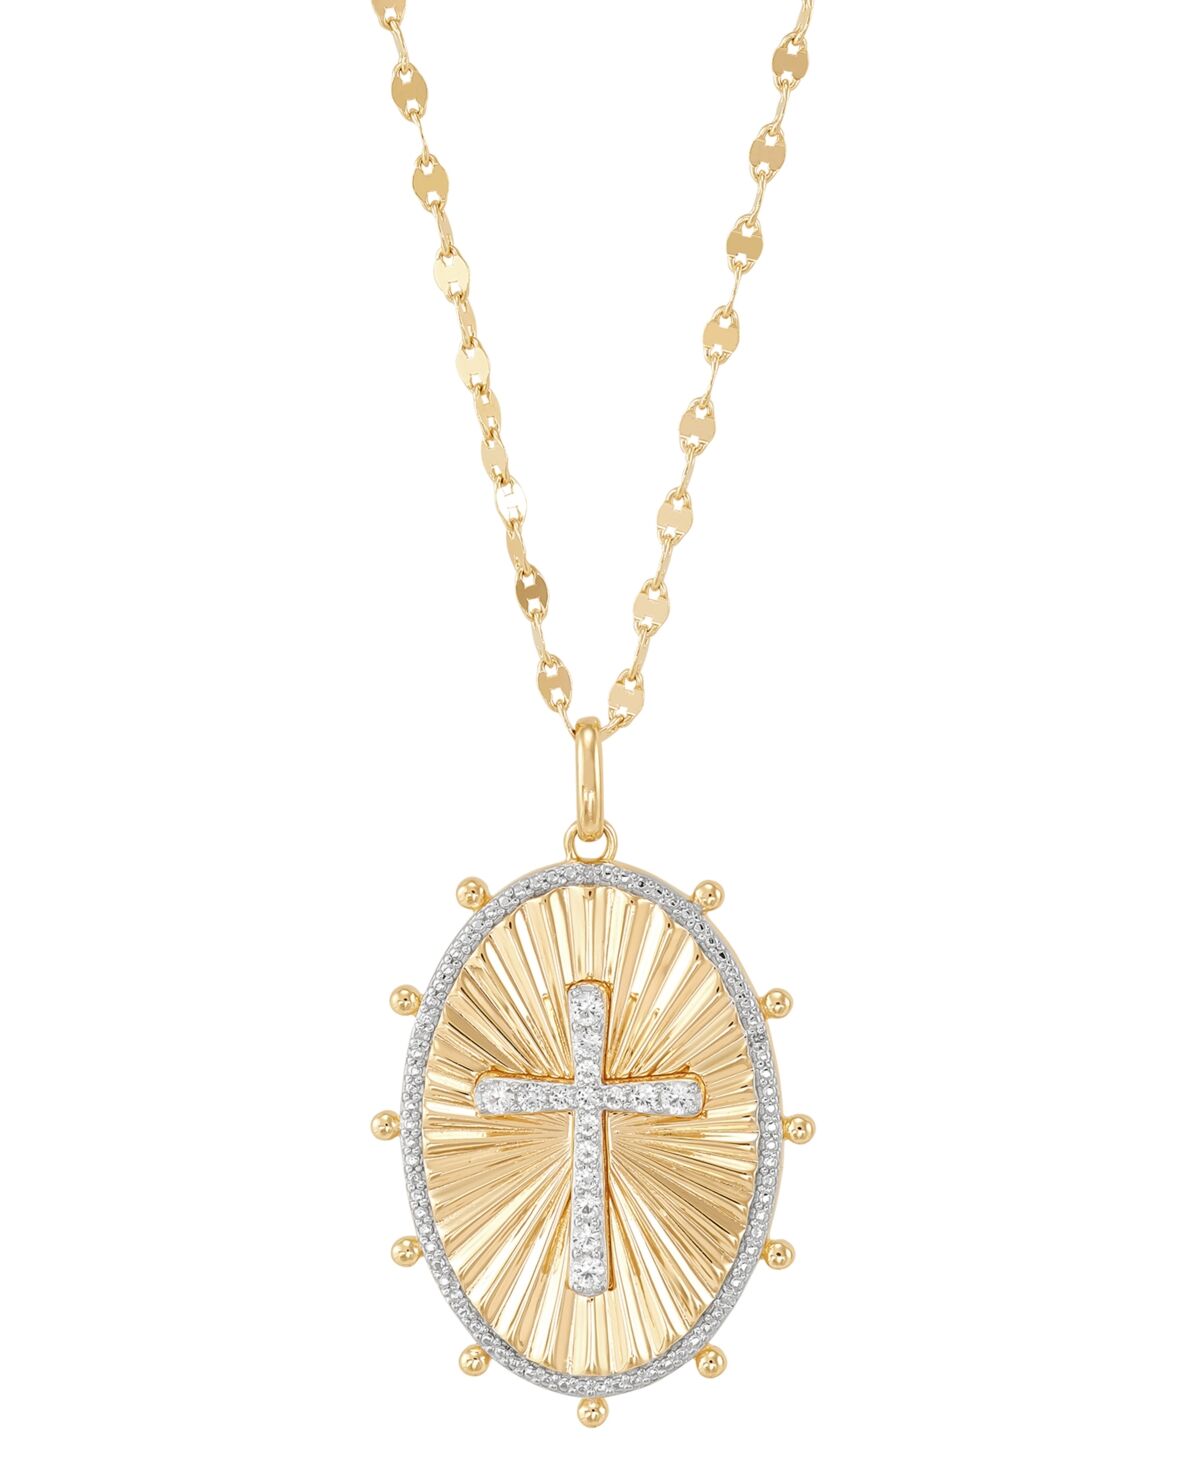 Macy's Lab-Created White Sapphire (1/4 ct. t.w.) & Diamond Accent Cross Oval Pendant Necklace in 14k Gold-Plated Sterling Silver, 16